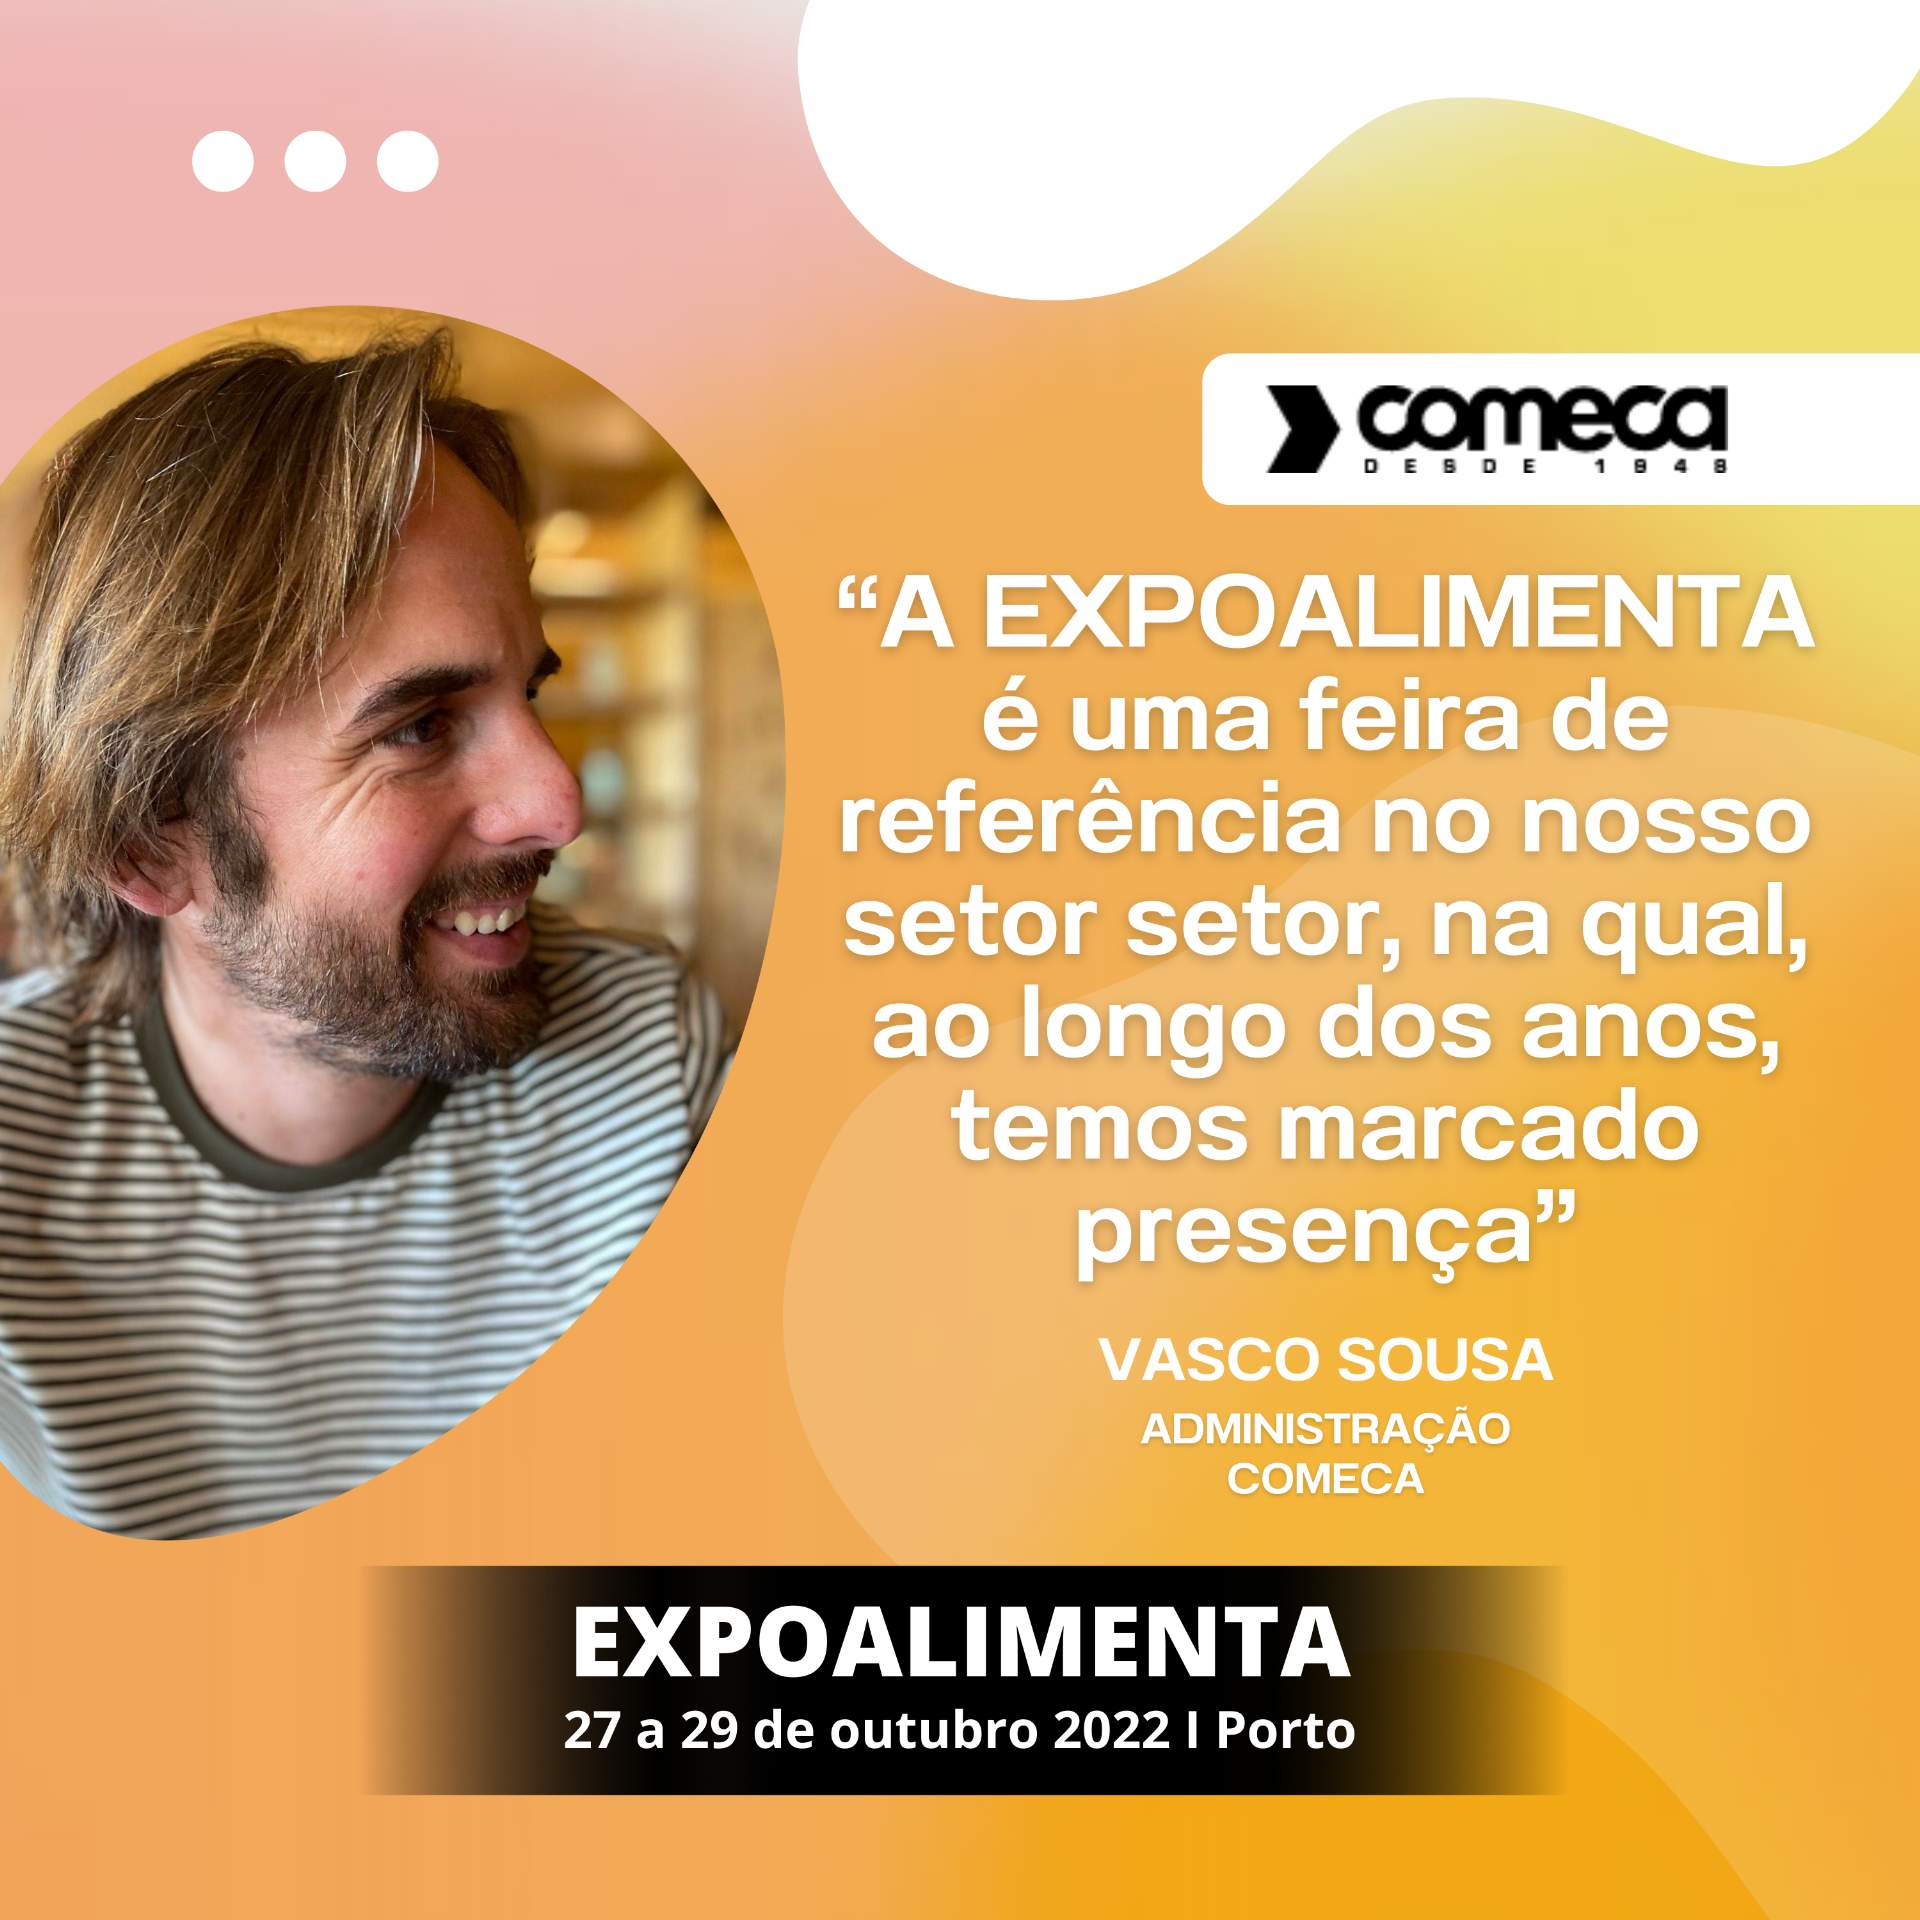 COMECA: "EXPOALIMENTA is a reference fair in our sector, in which, throughout the years, we have marked our presence"